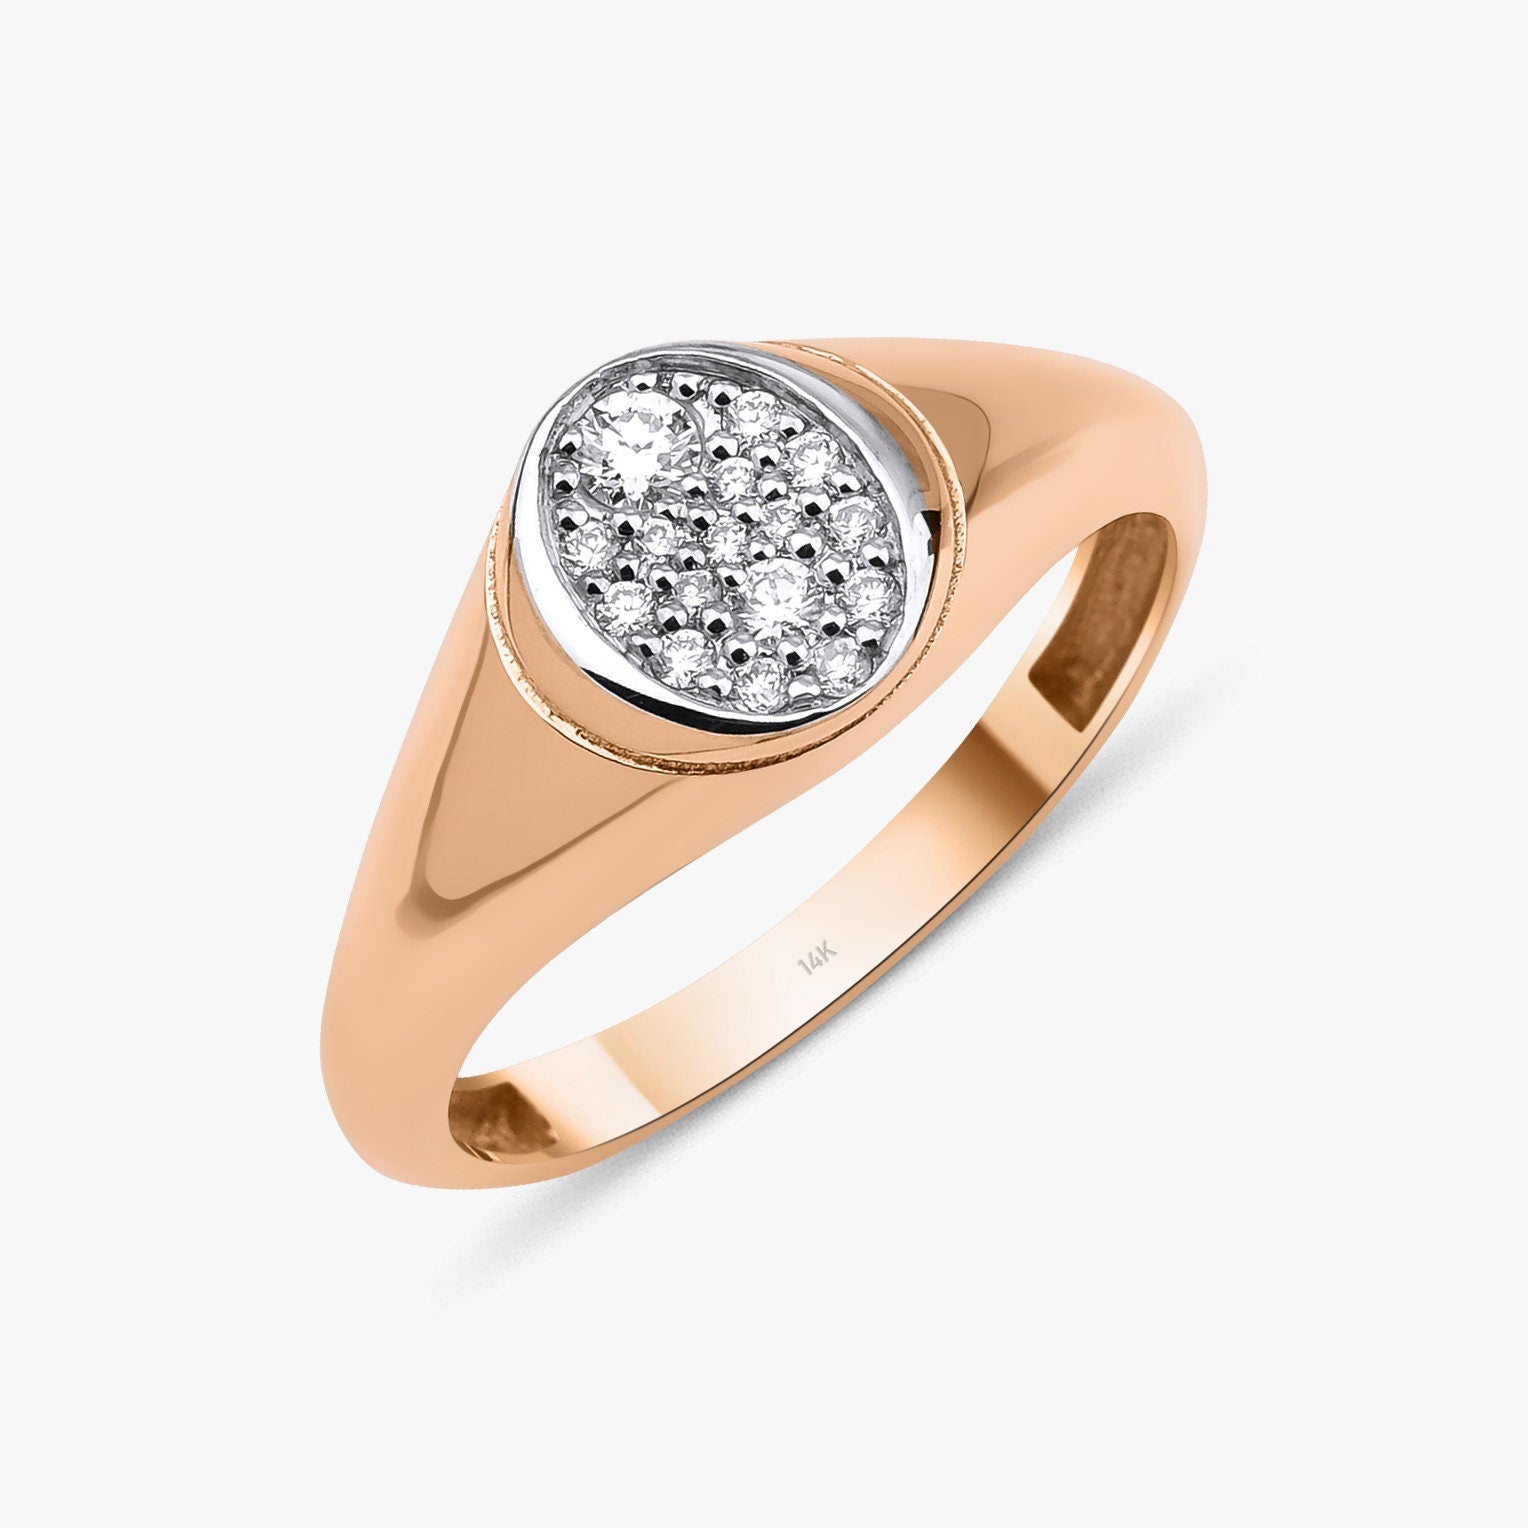 Oval Pave Diamond Ring in 14K Gold